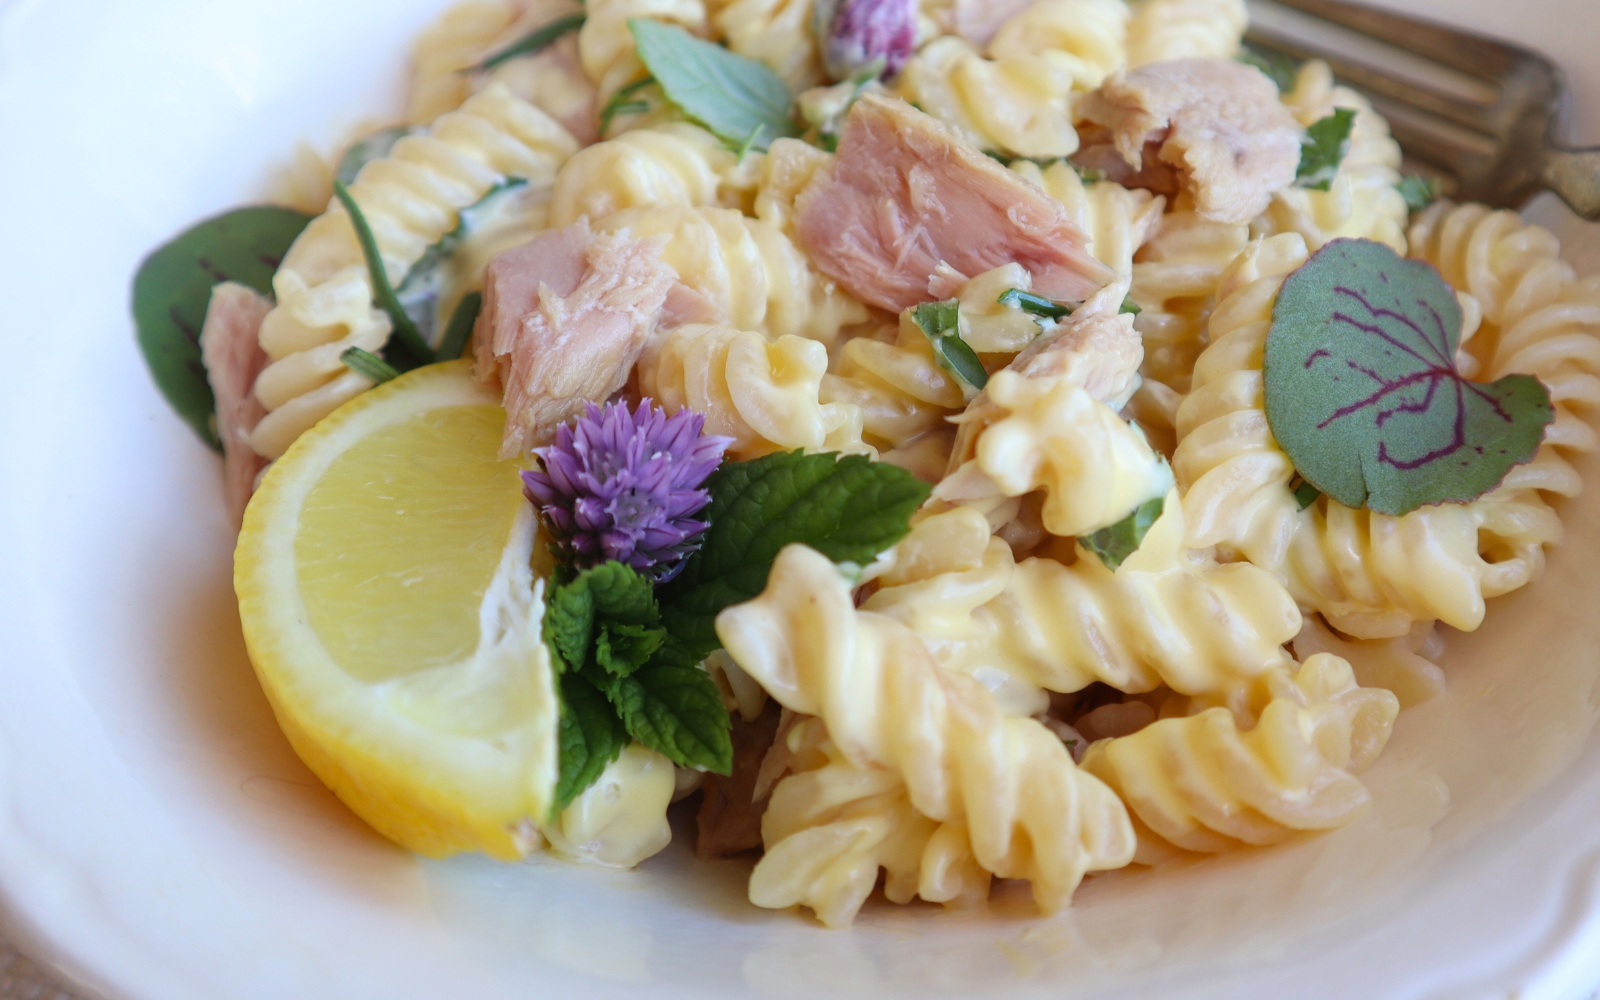 pasta salad with chive blossoms